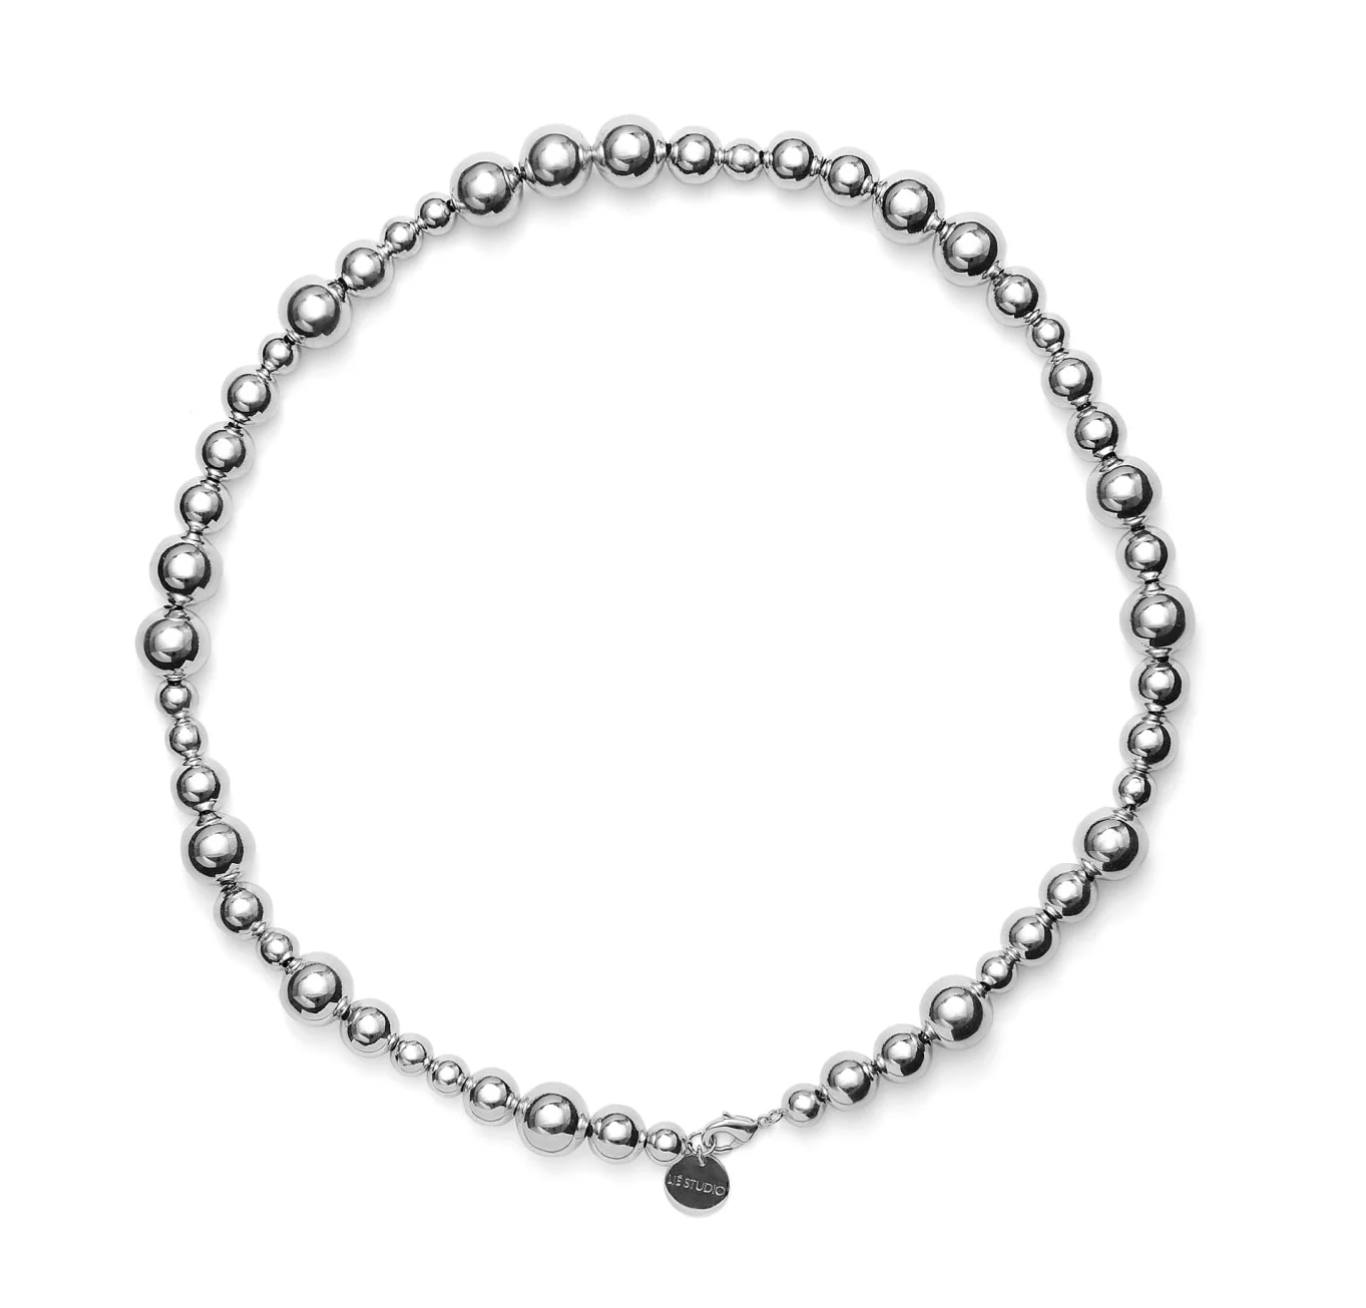 Product Image for The Elly Necklace, Silver